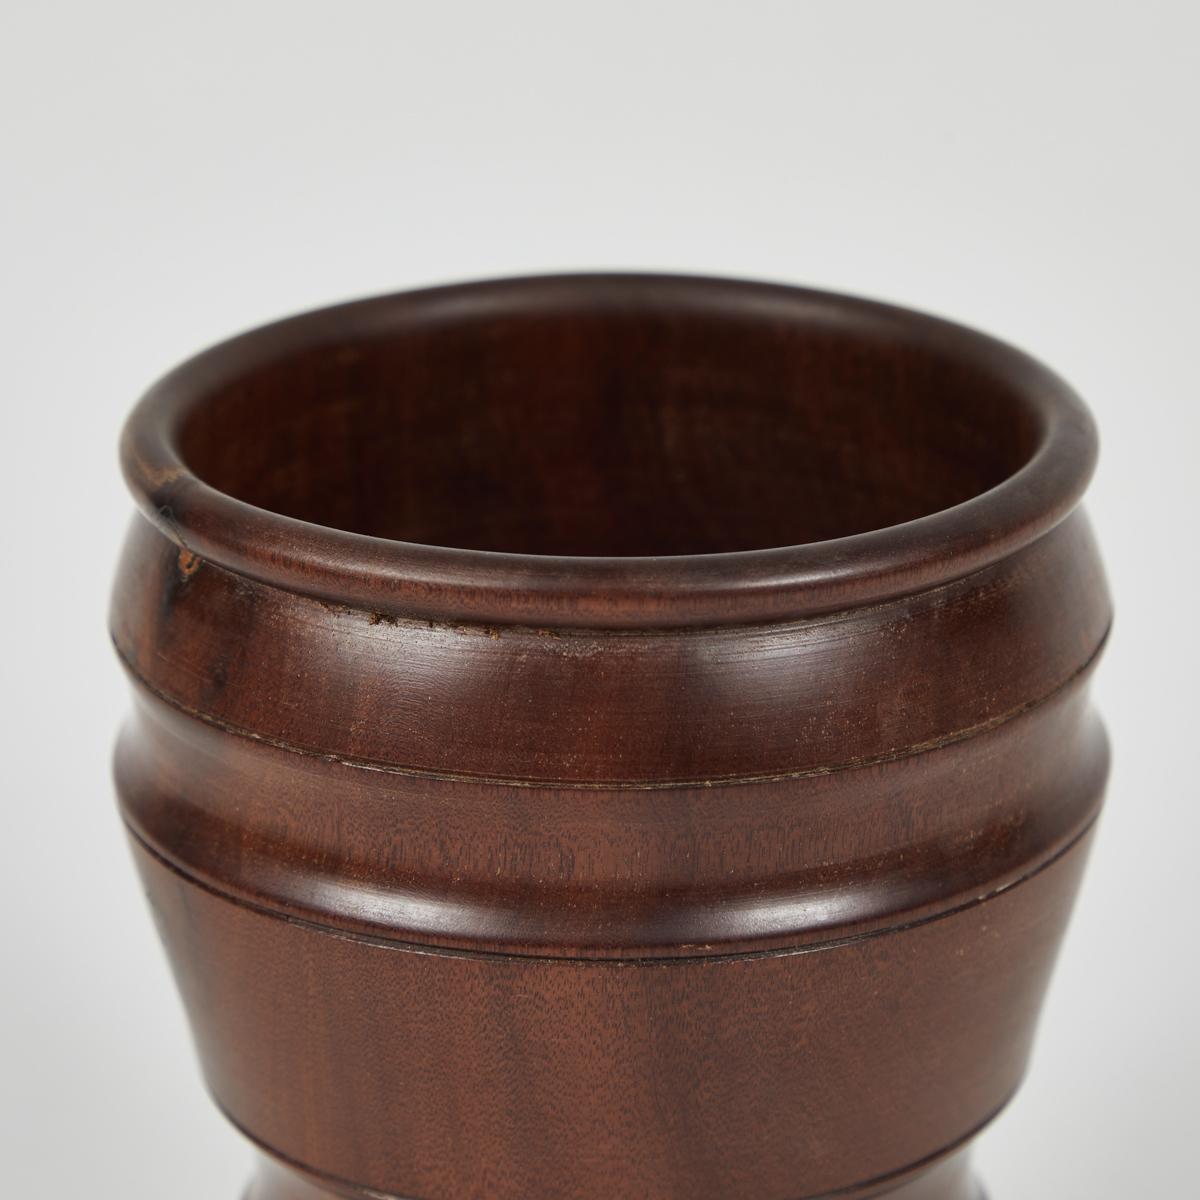 Late 19th-century English wood urn or vase with 